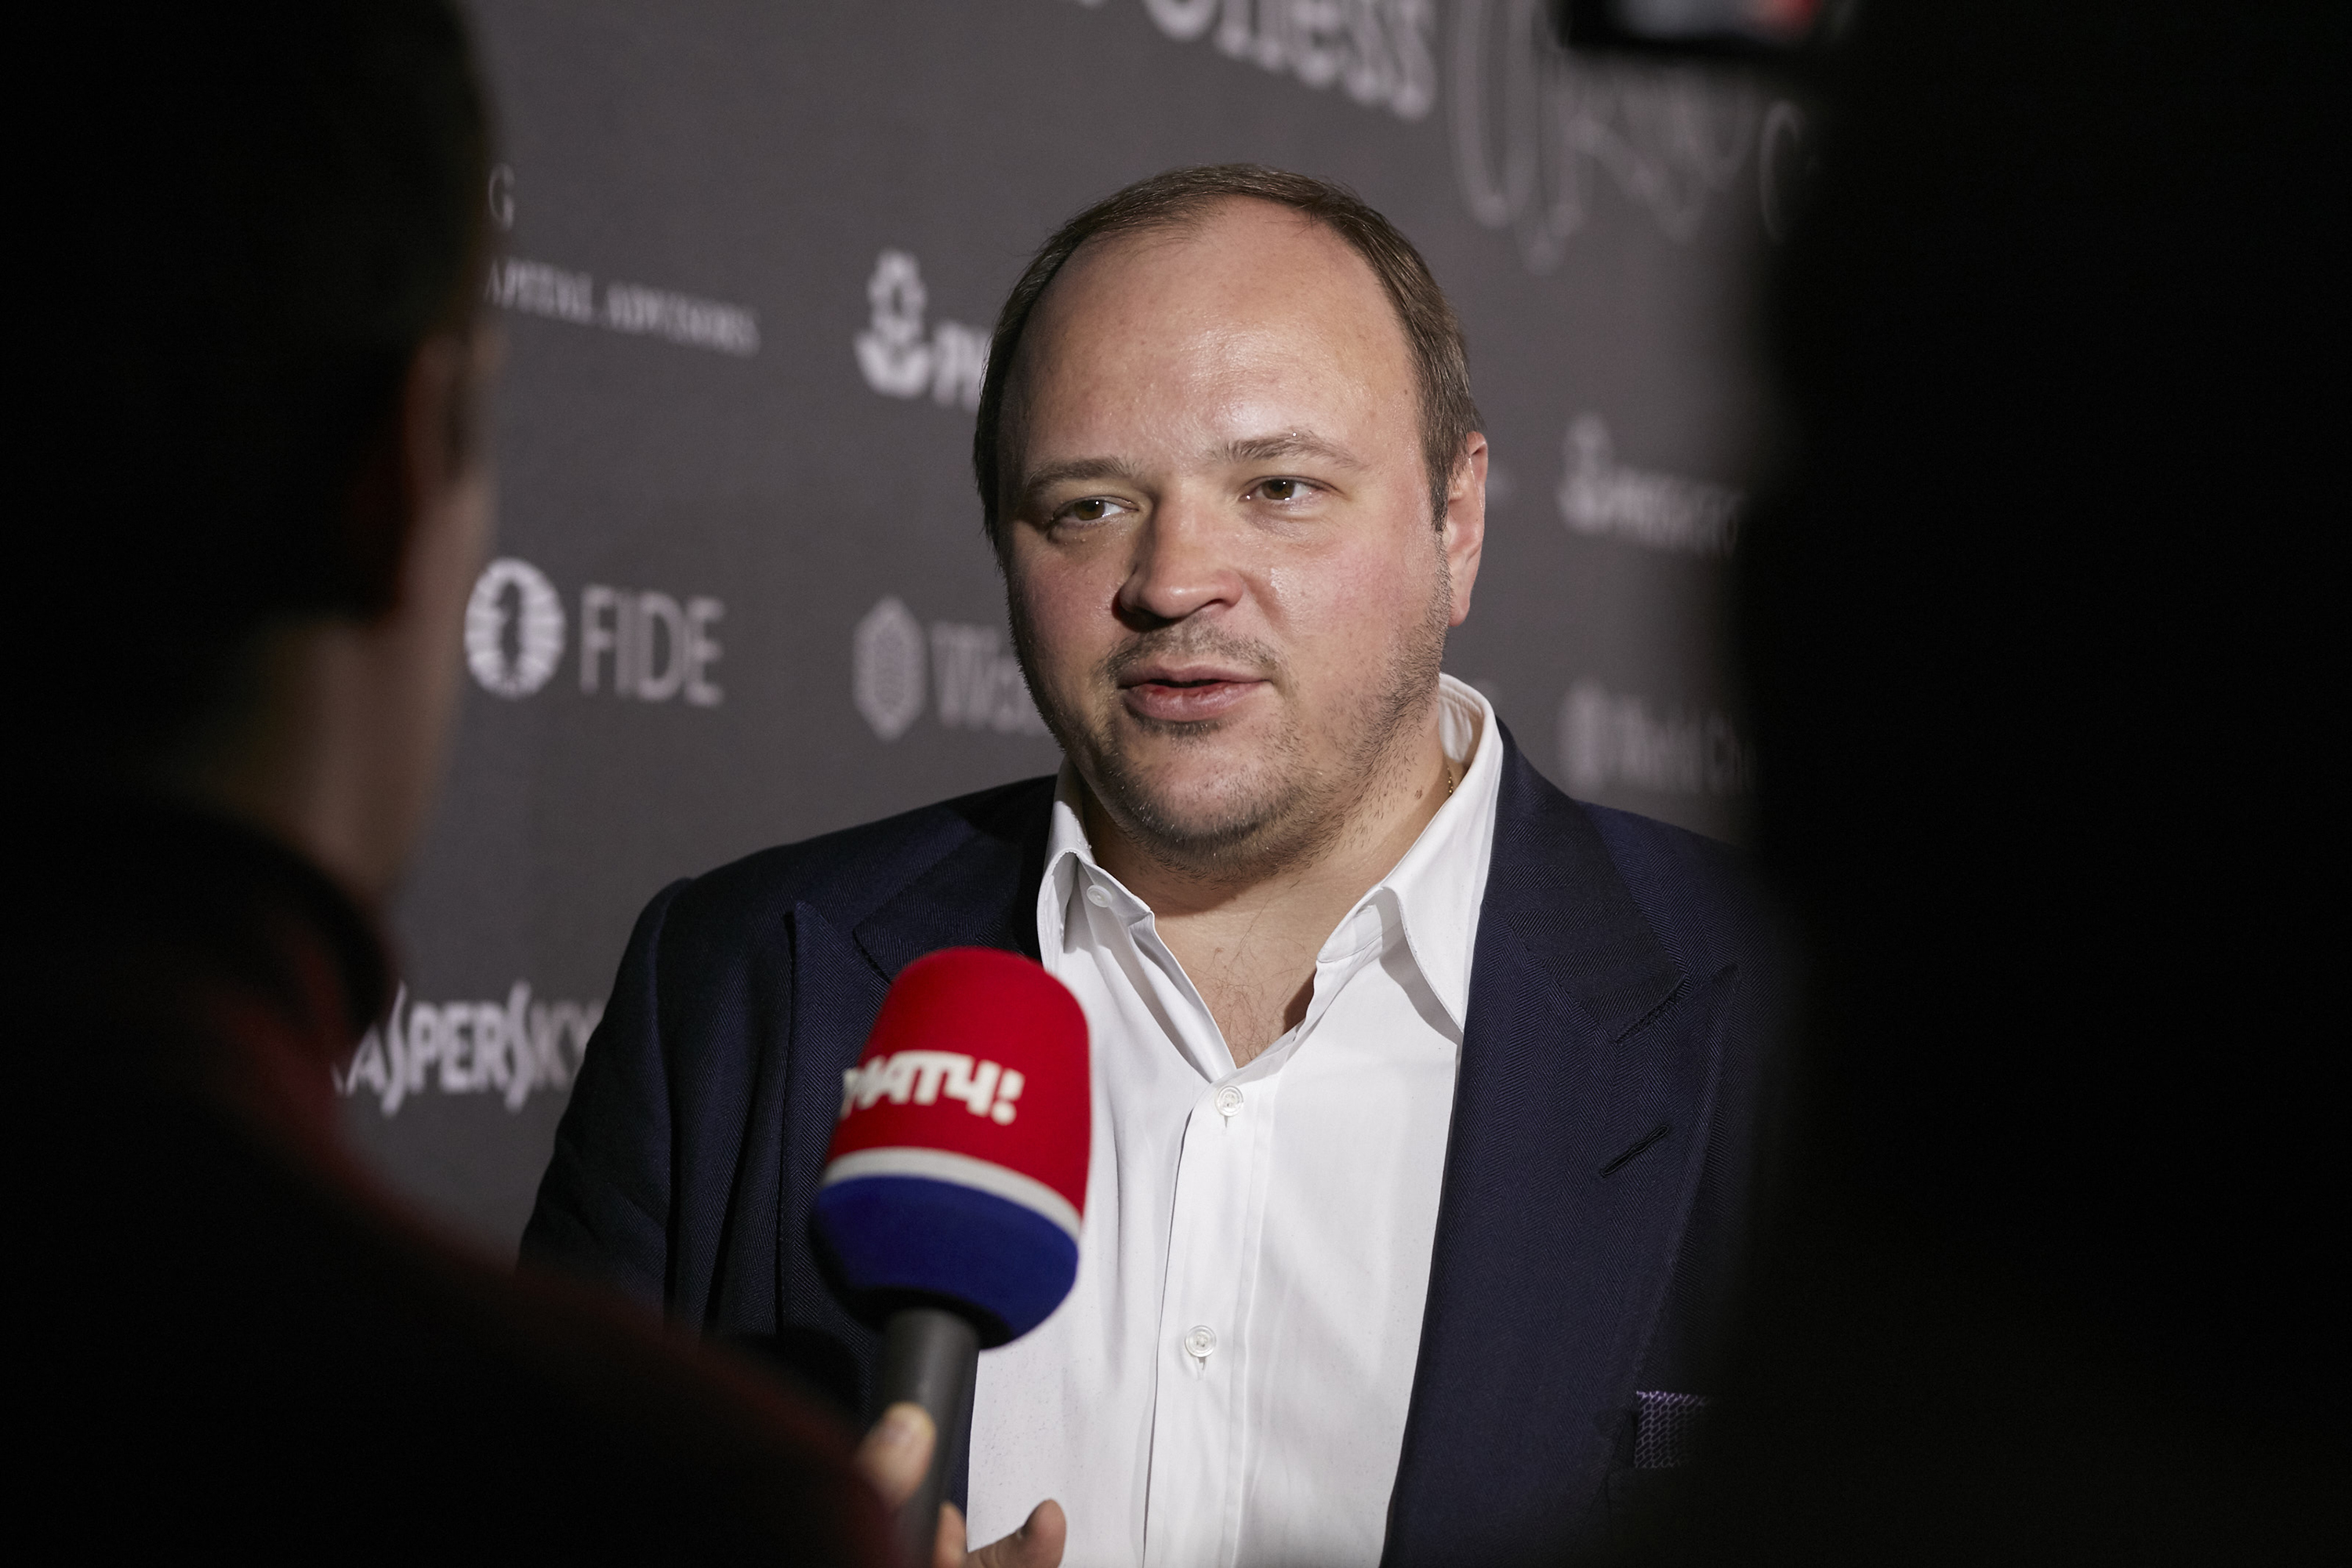 Andrey Grigorievich Gurev, CEO of PhosAgro, speaks in an interview at the opening press conference during the World Chess Championship on March 9, 2018 in Berlin, Germany.